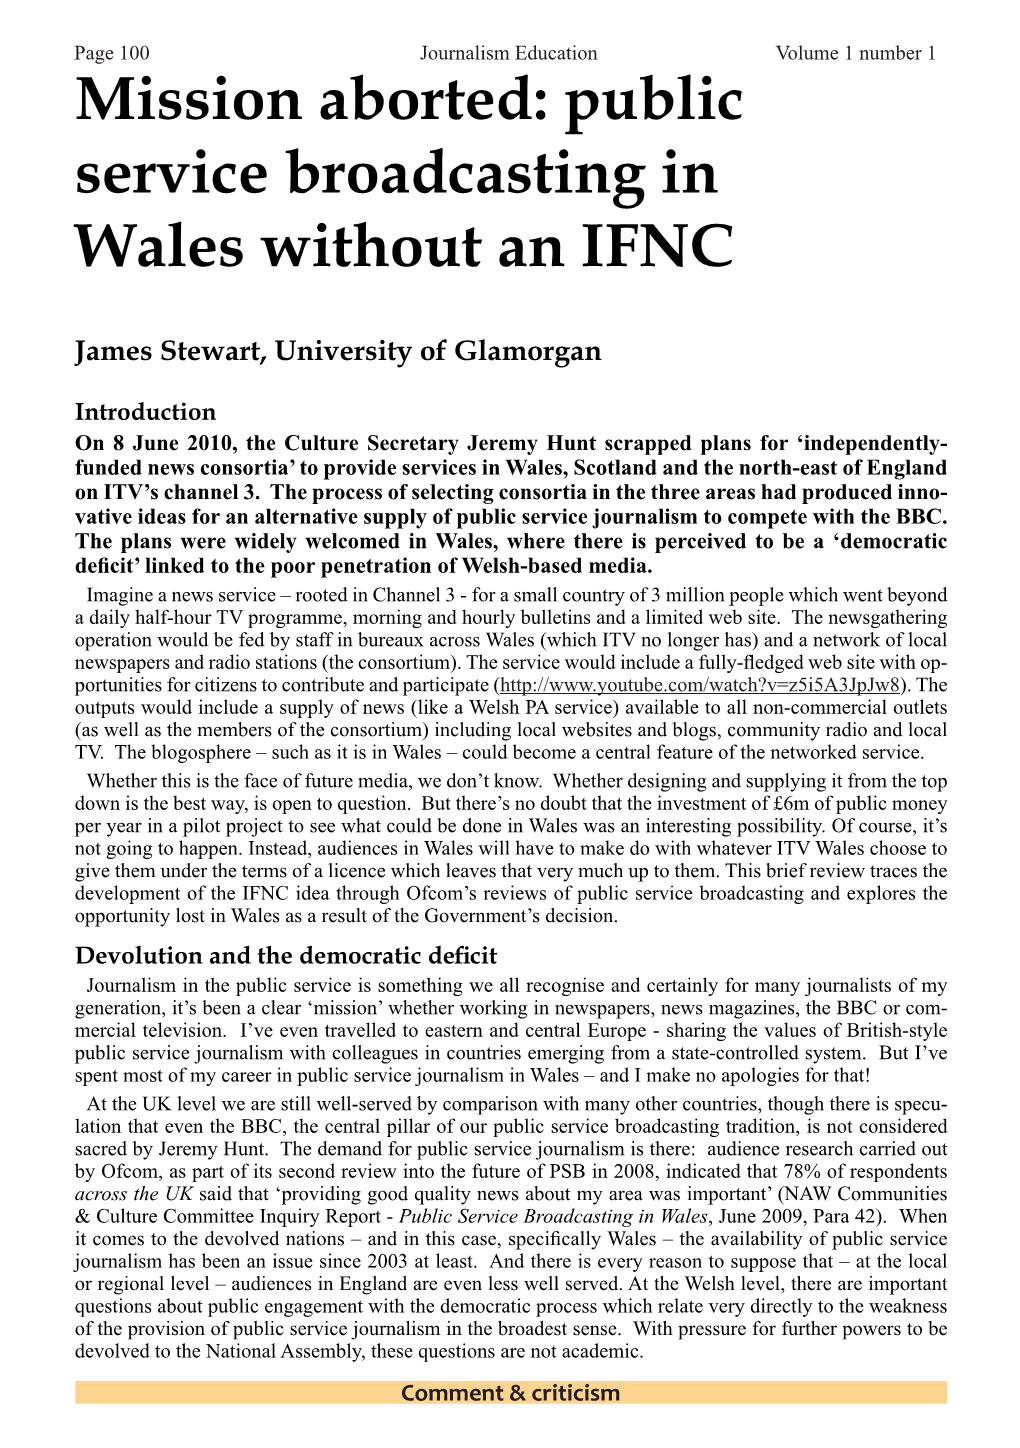 Mission Aborted: Public Service Broadcasting in Wales Without an IFNC